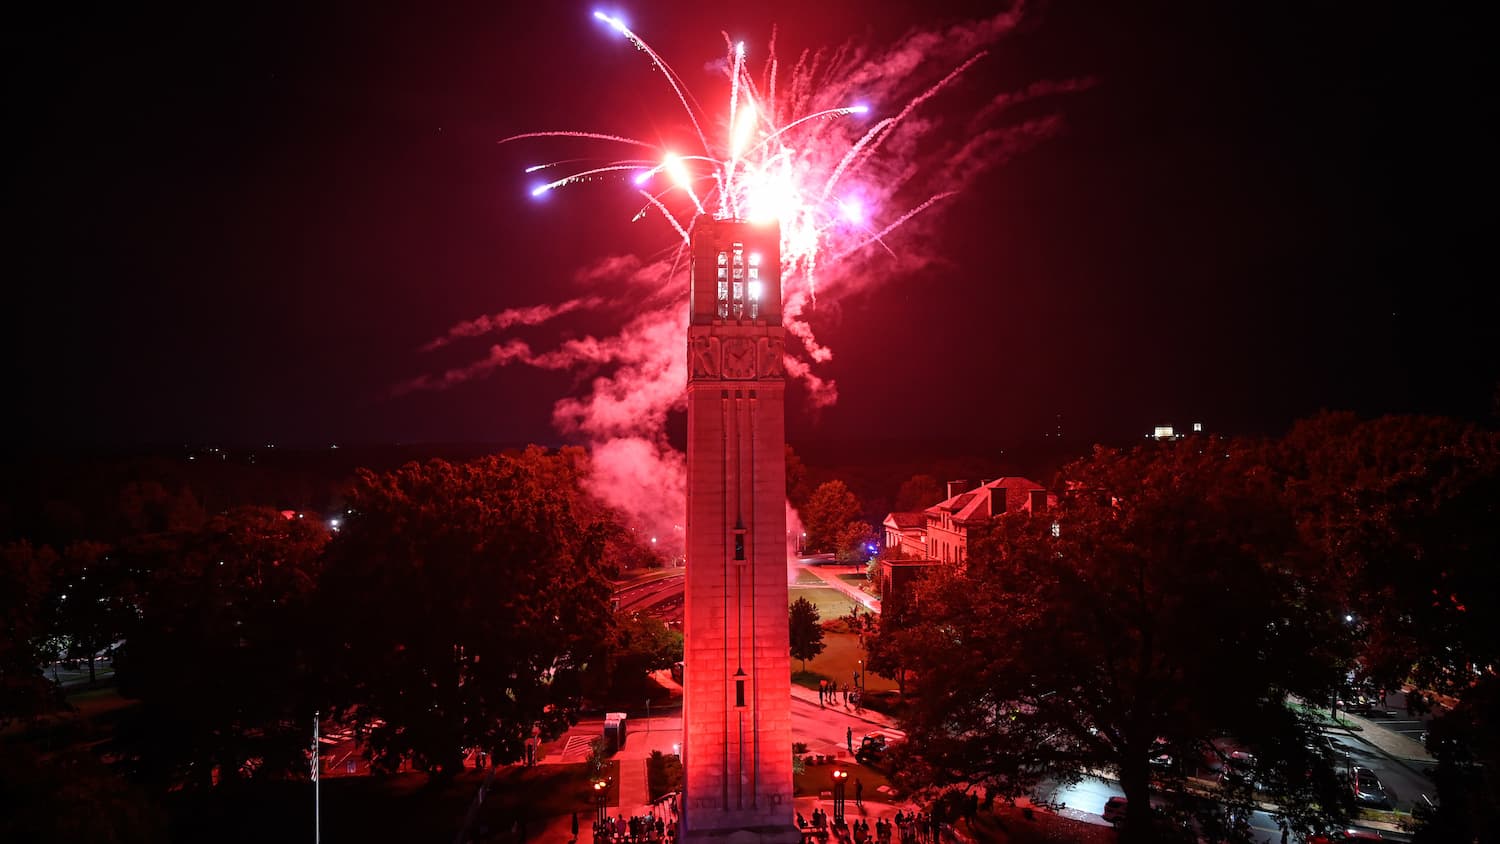 Fireworks explode over the NC State Belltower.